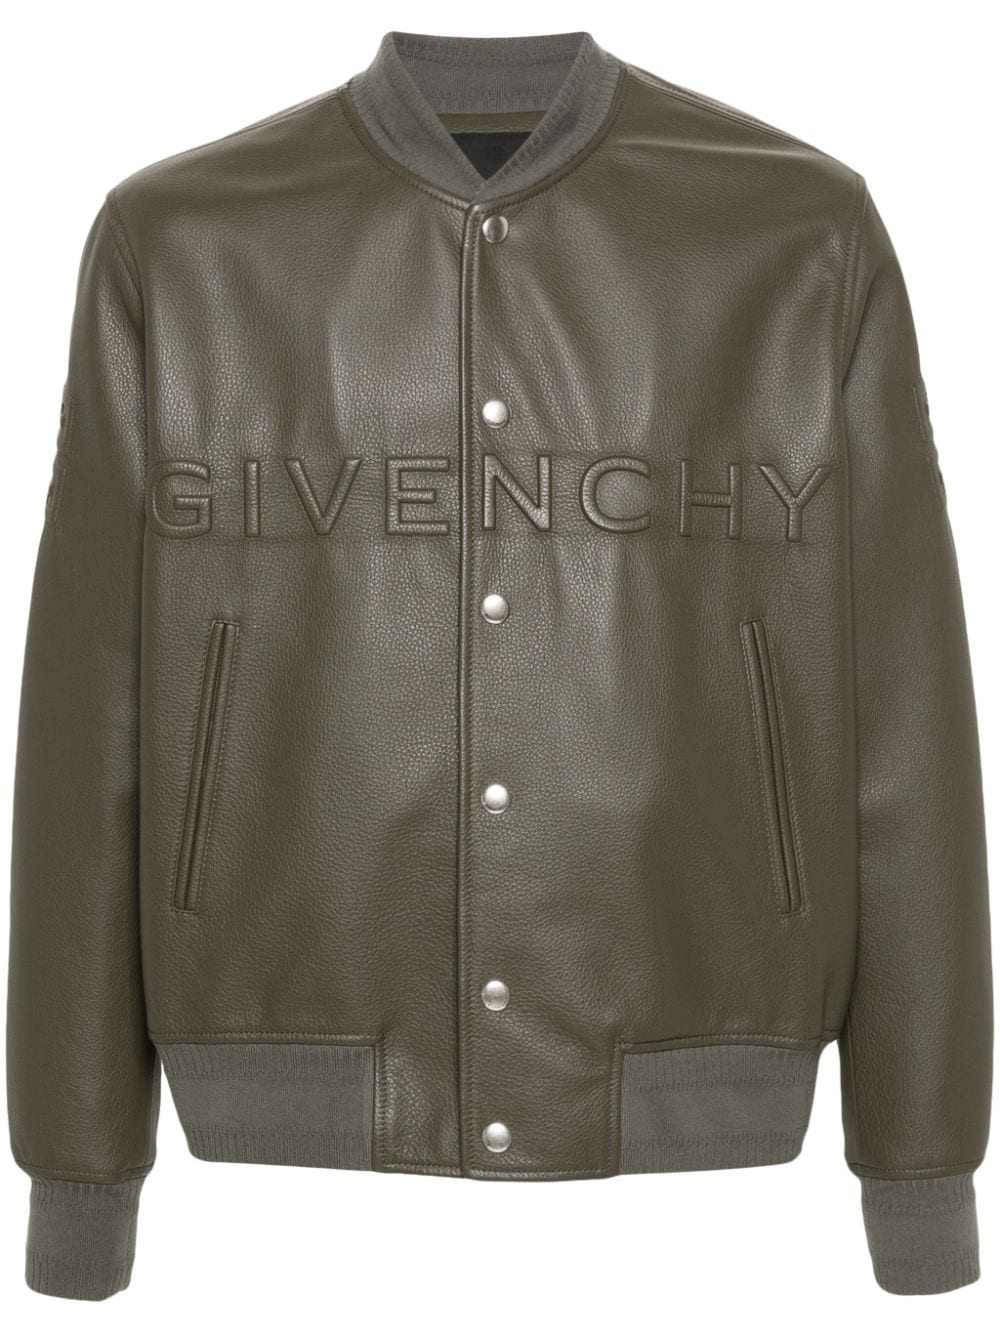 Givenchy logo-embossed bomber jacket - Green von Givenchy